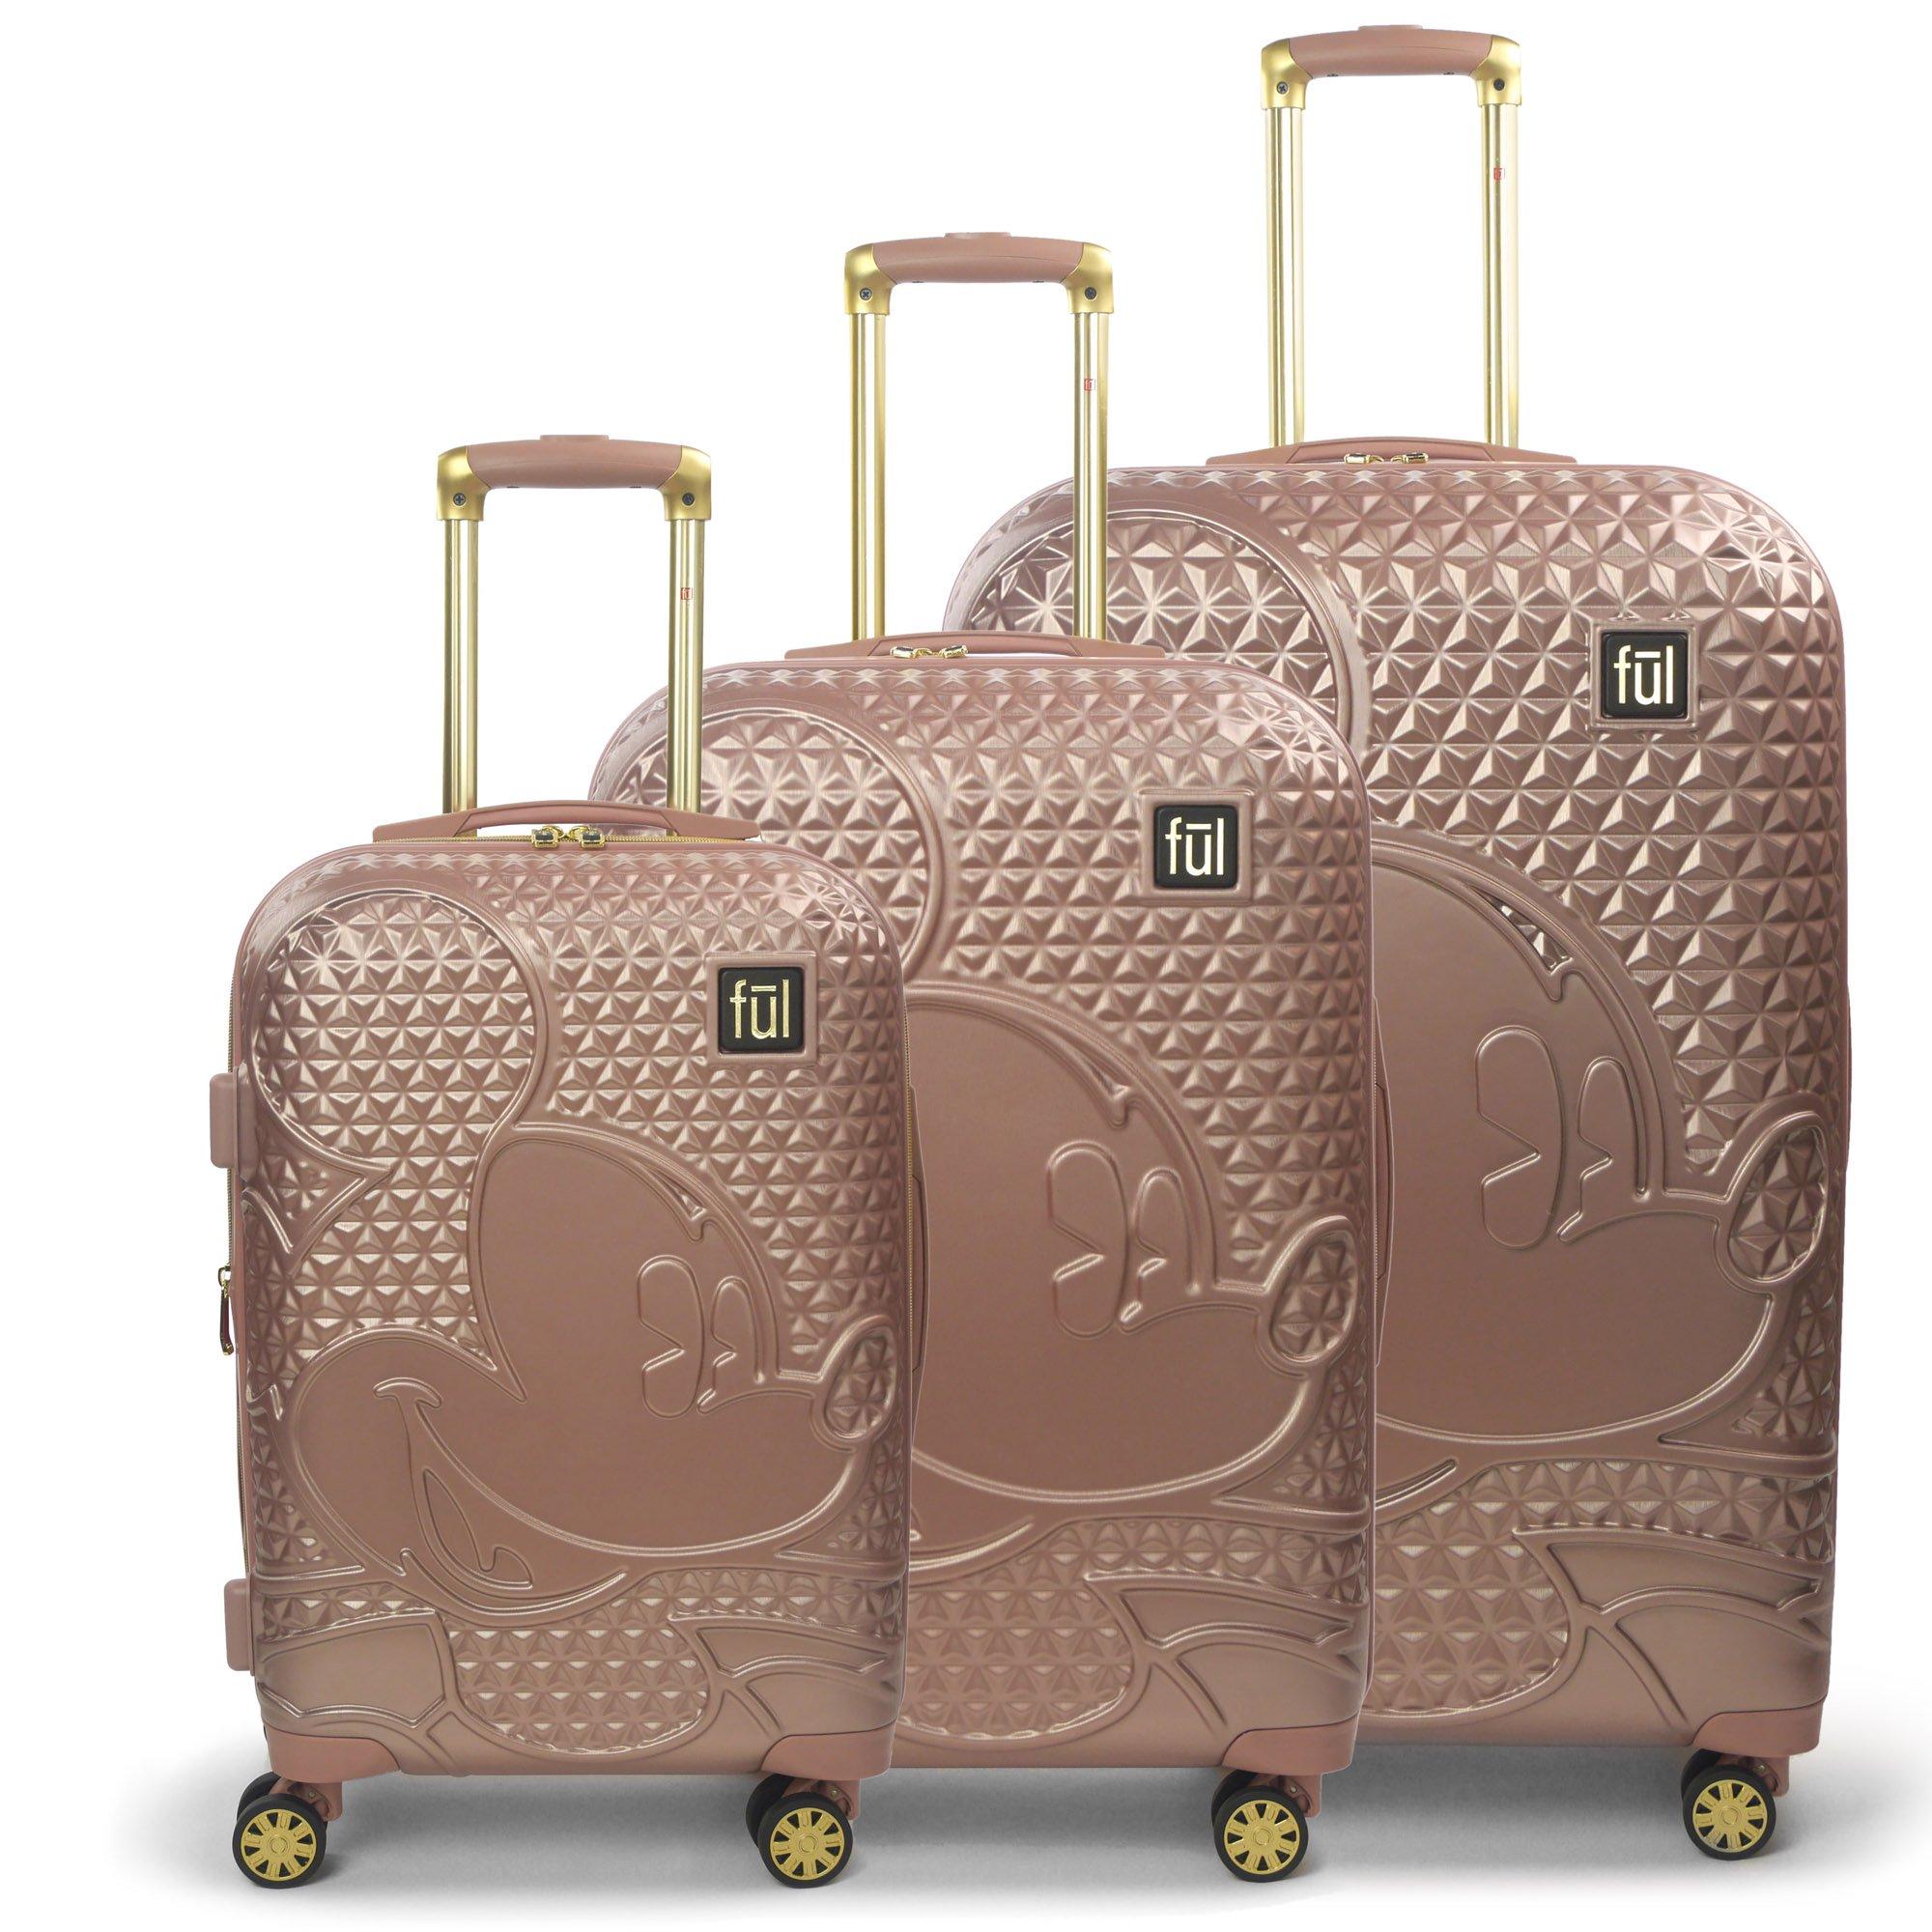 Ful Disney Textured Mickey Mouse Hard Sided 3 Luggage Set for $257.08 Shipped